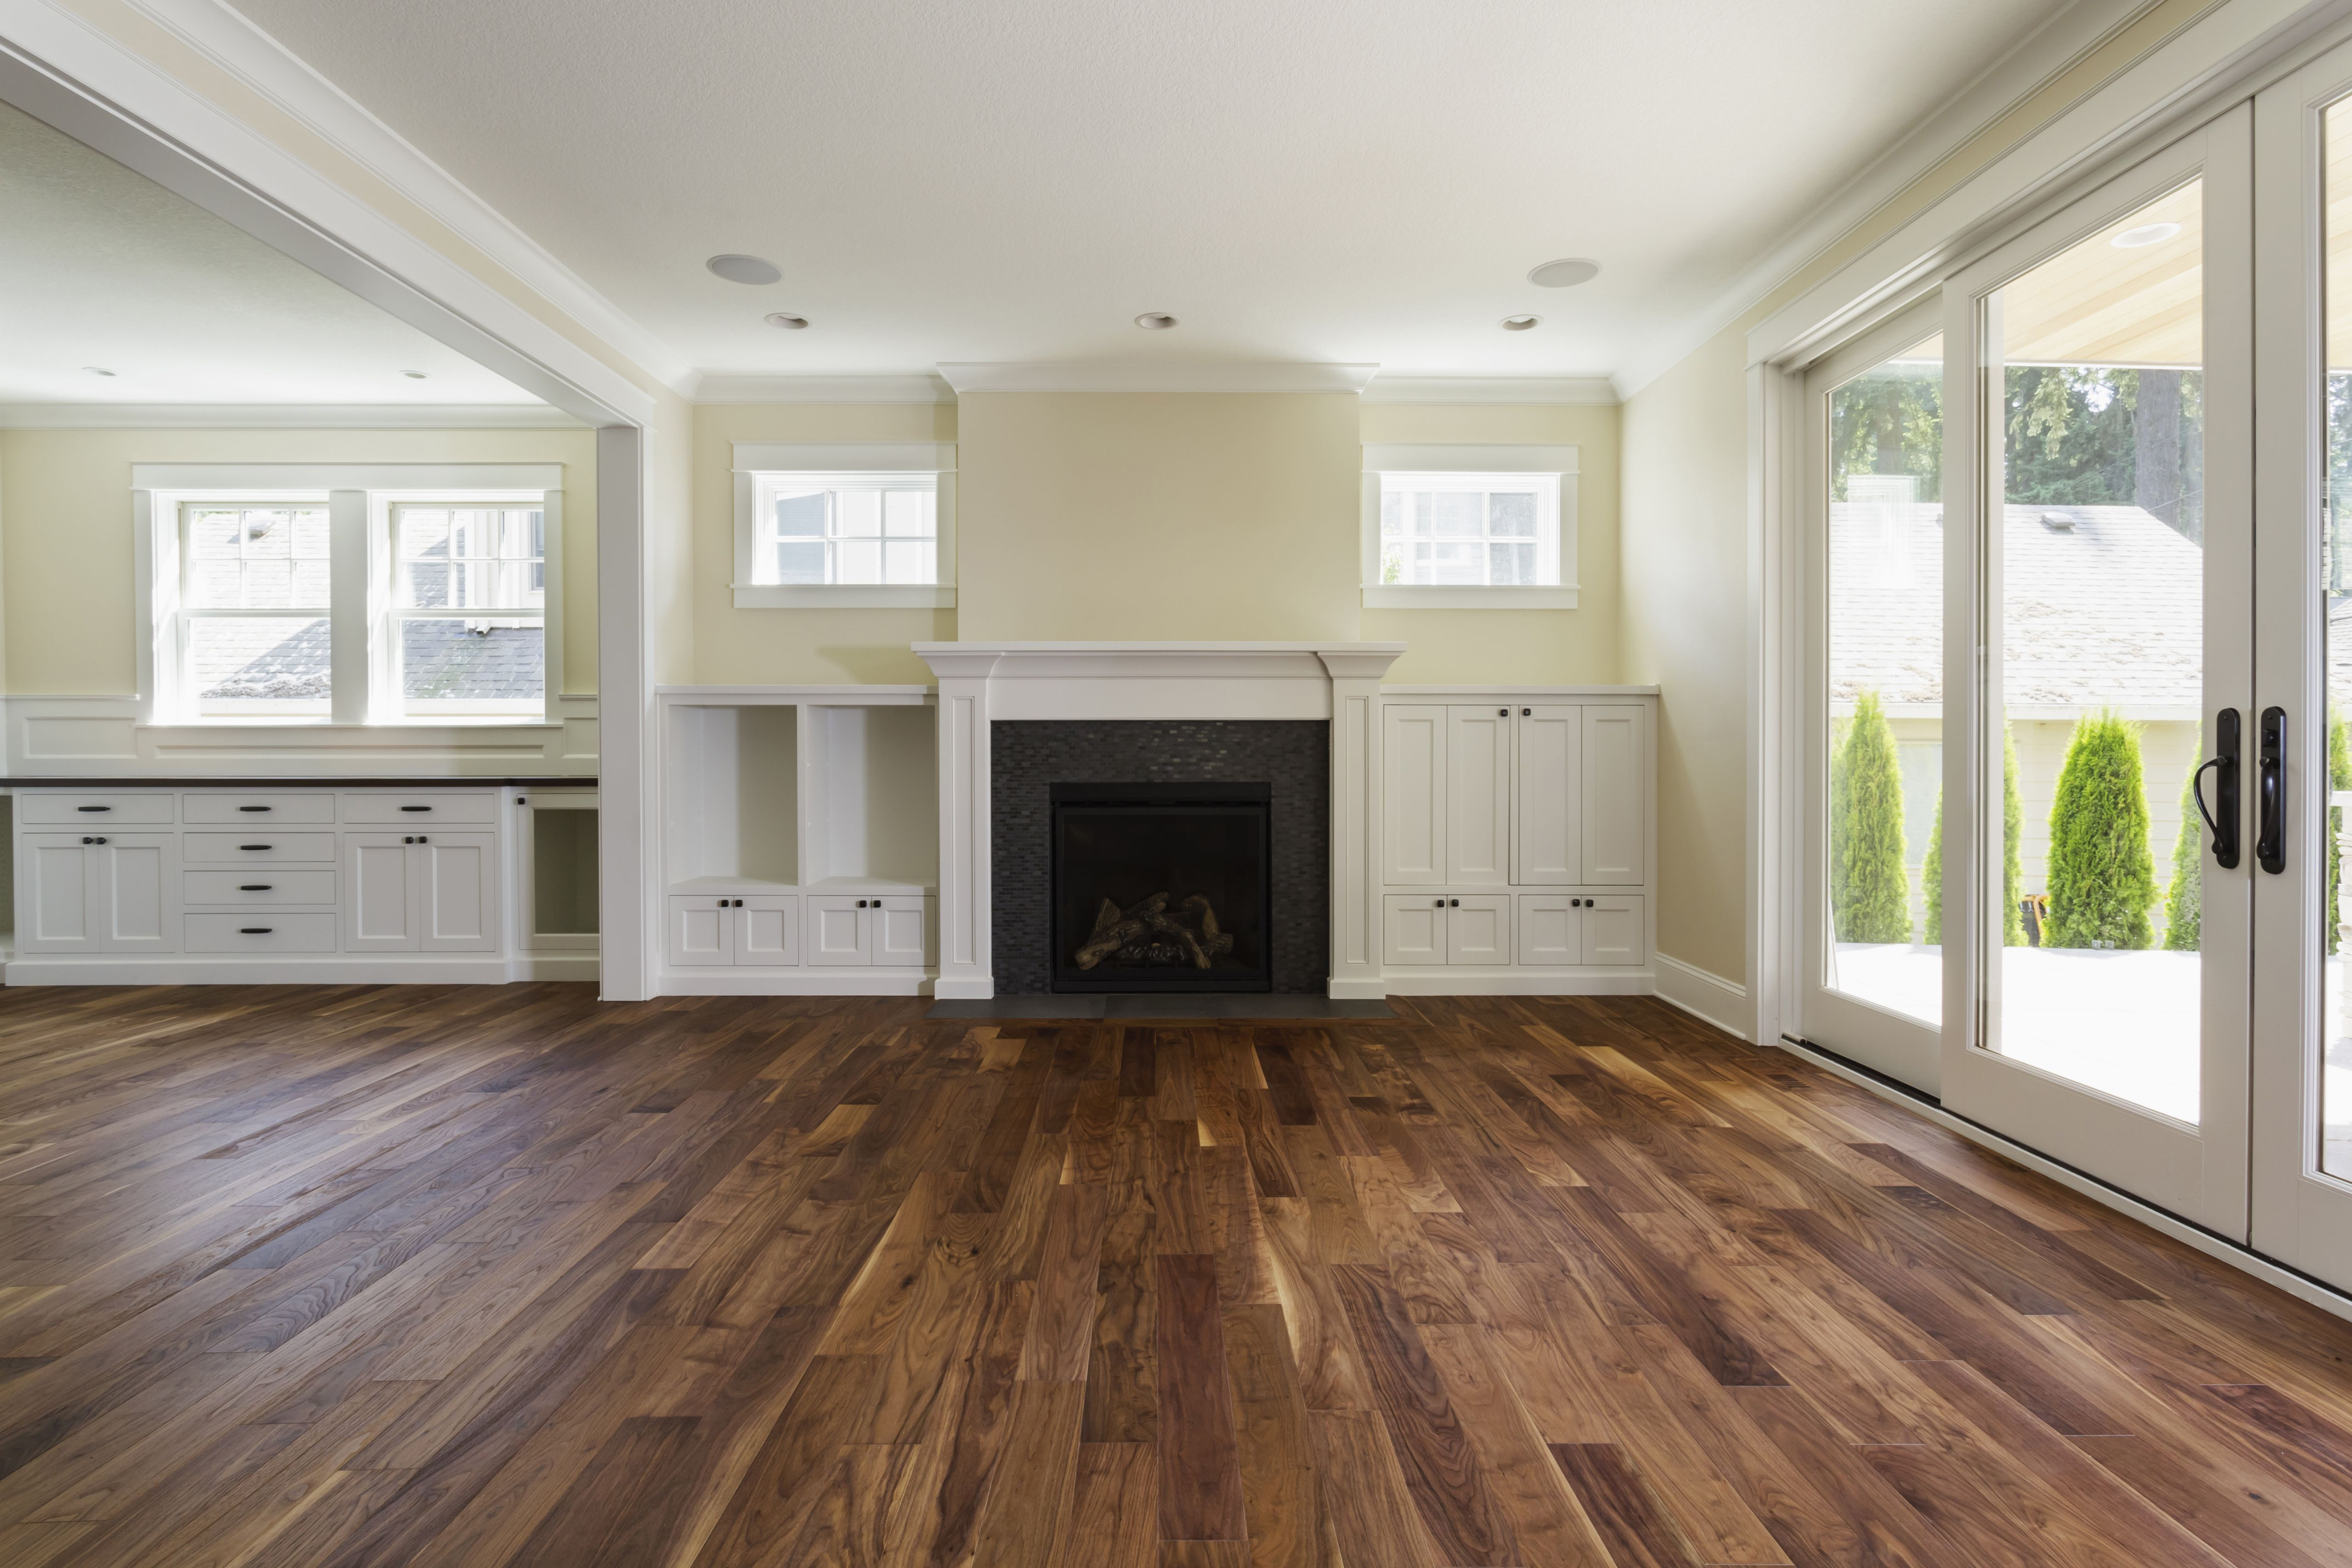 16 Fabulous How to Repair and Refinish Hardwood Floors 2024 free download how to repair and refinish hardwood floors of the pros and cons of prefinished hardwood flooring inside fireplace and built in shelves in living room 482143011 57bef8e33df78cc16e035397